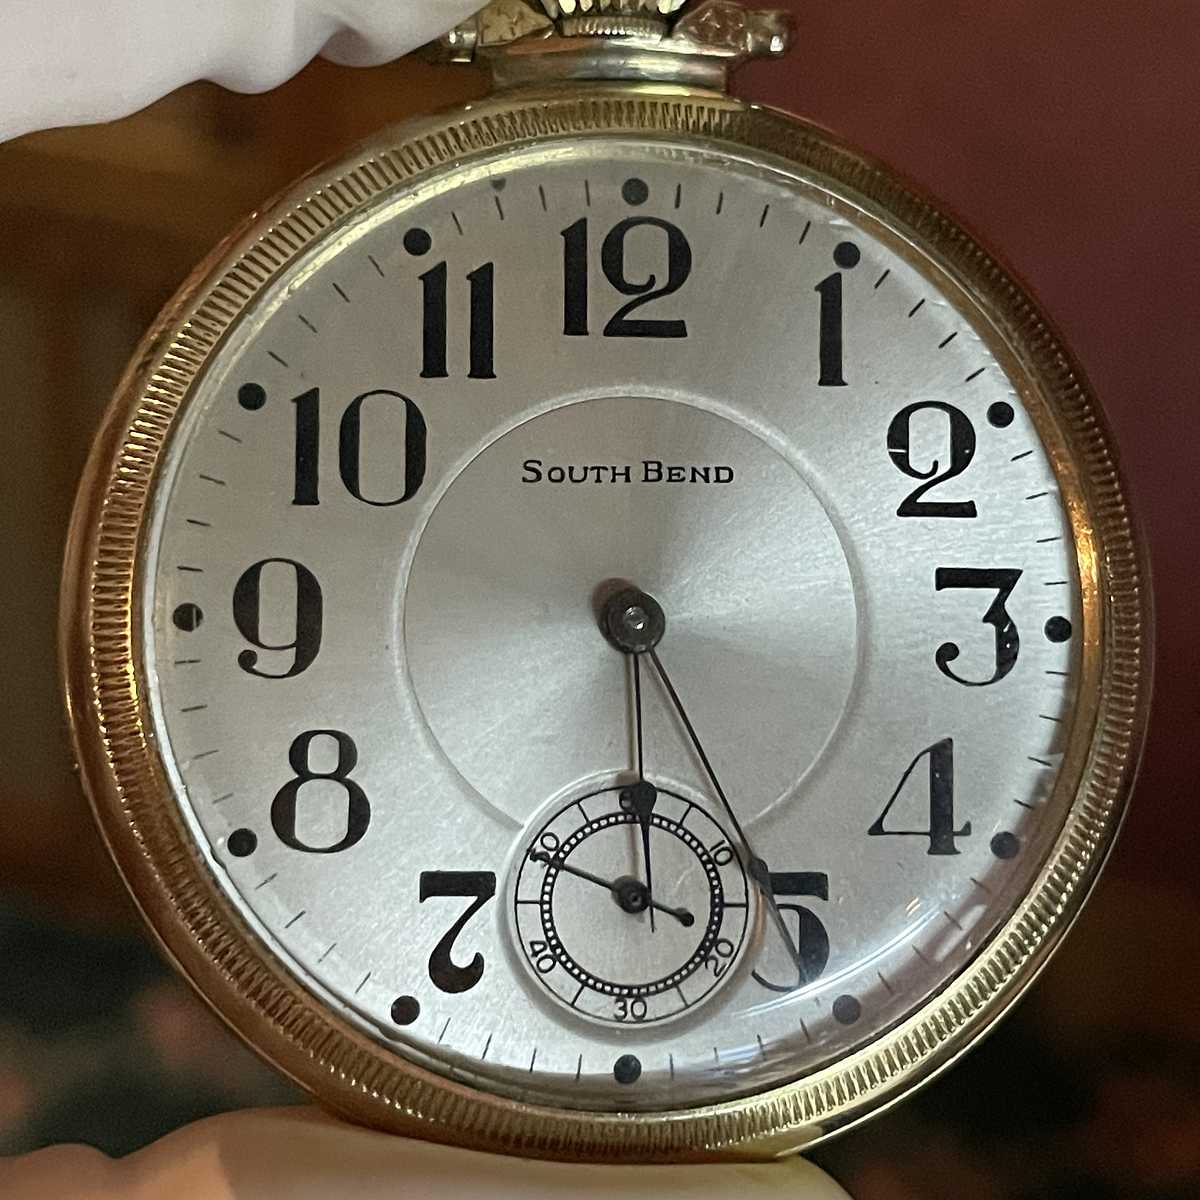 1928 South Bend Watch Grade 211 Gold shimmery dial in pocket watch case